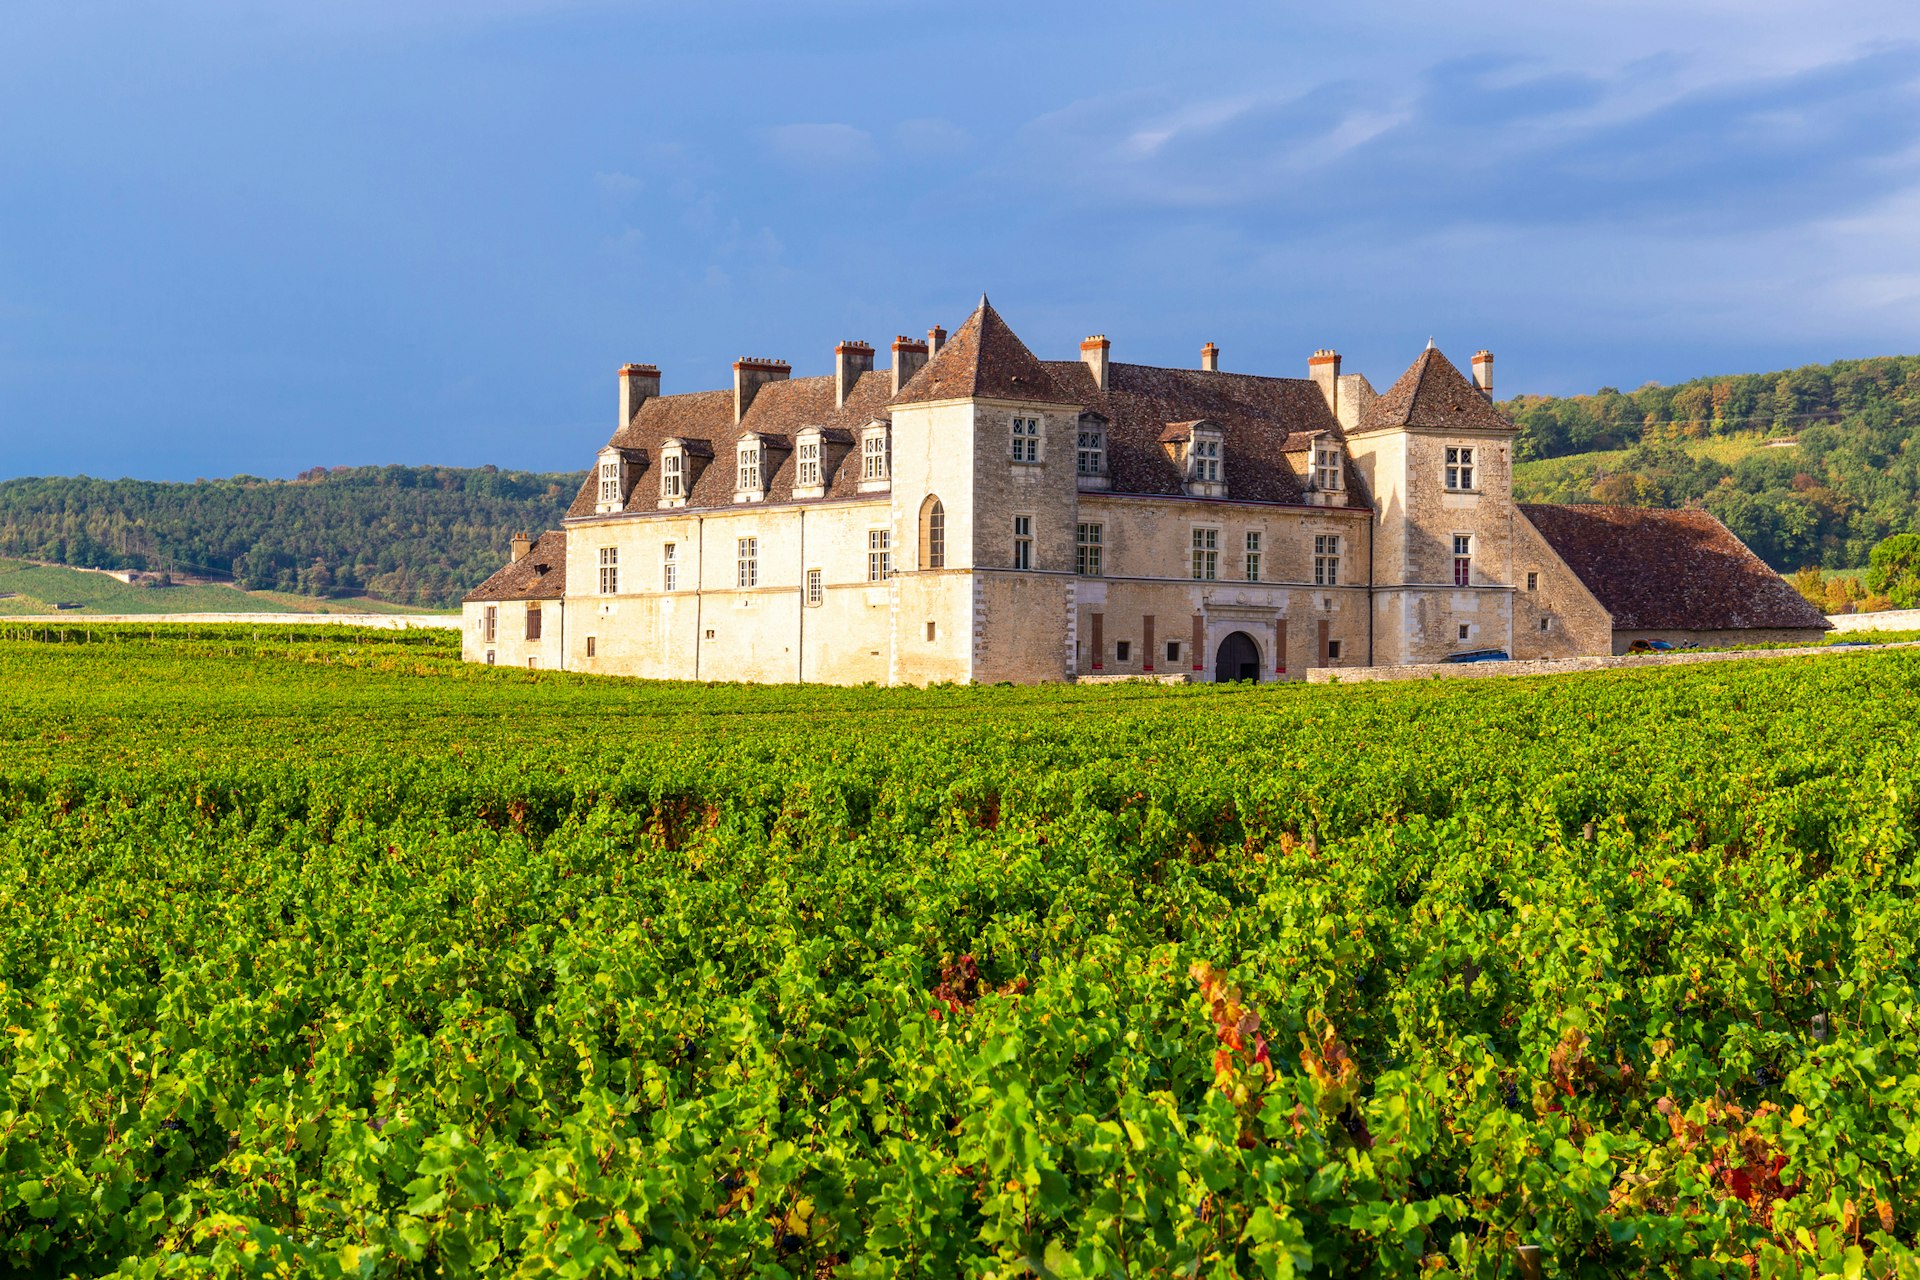 An external view of Vougeot castle in Burgundy surrounded by vineyards